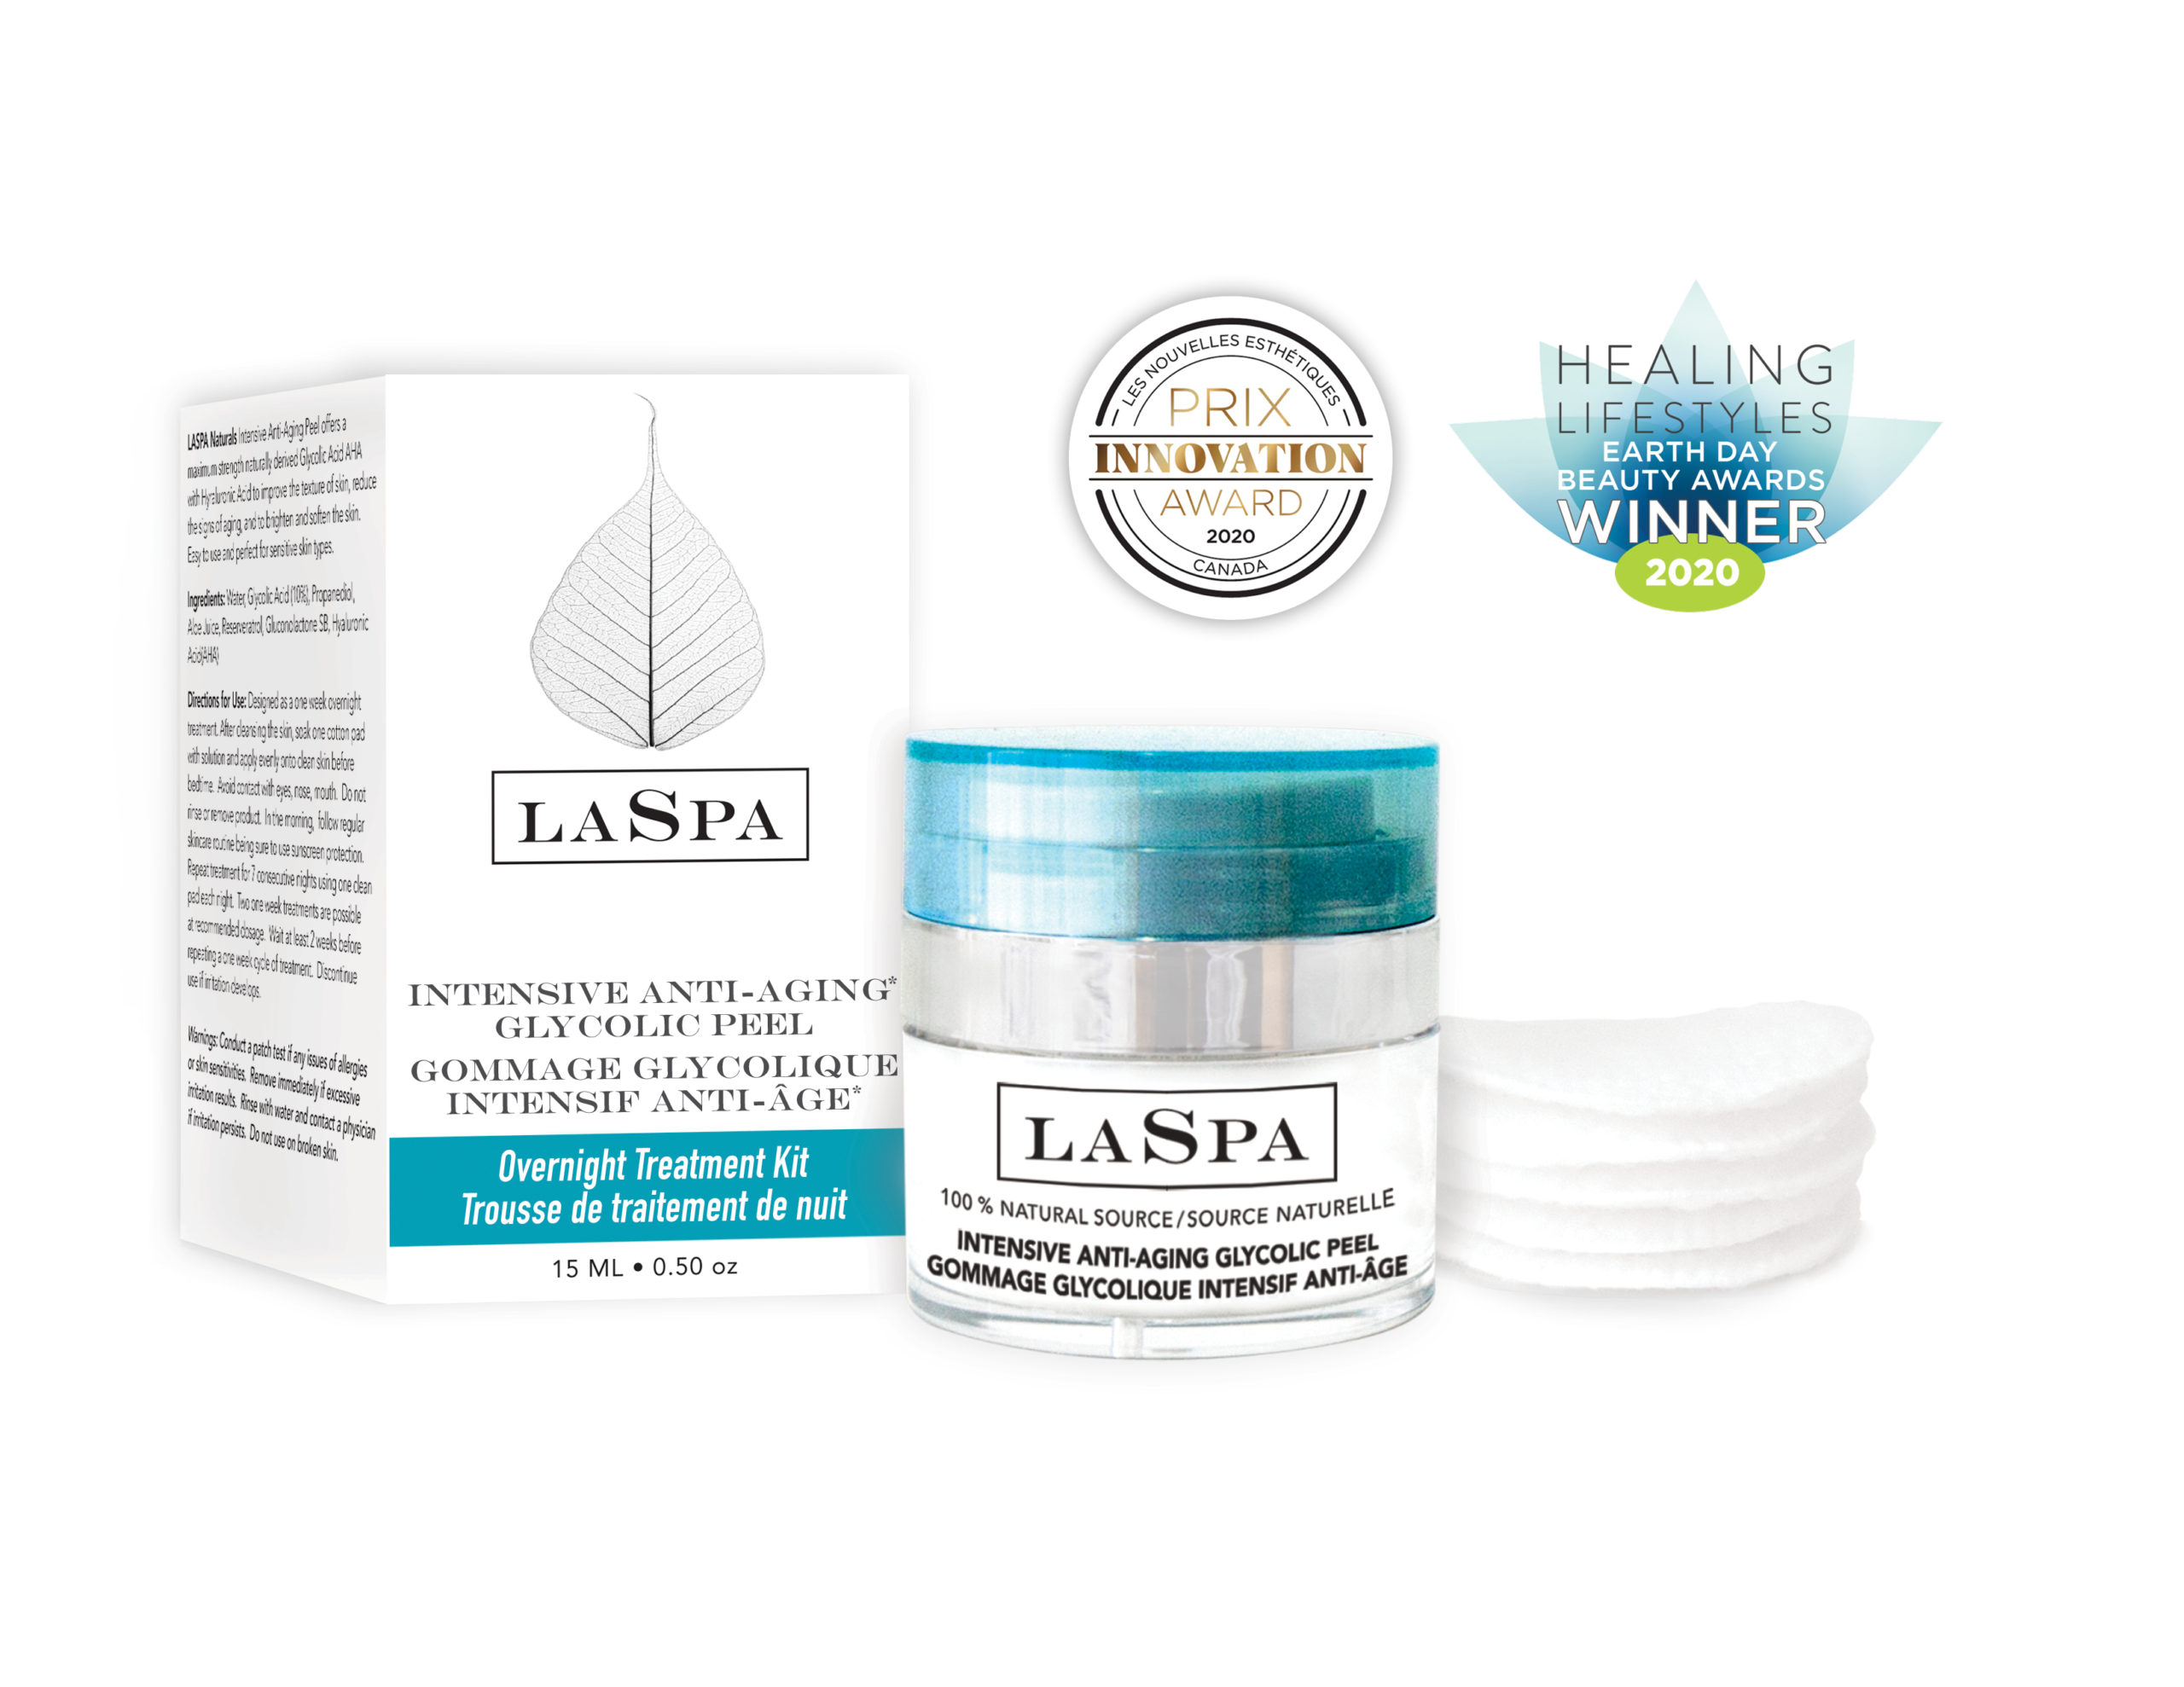 LASPA glycolic peel for Chemical Exfoliation with its packaging,pads and its awards